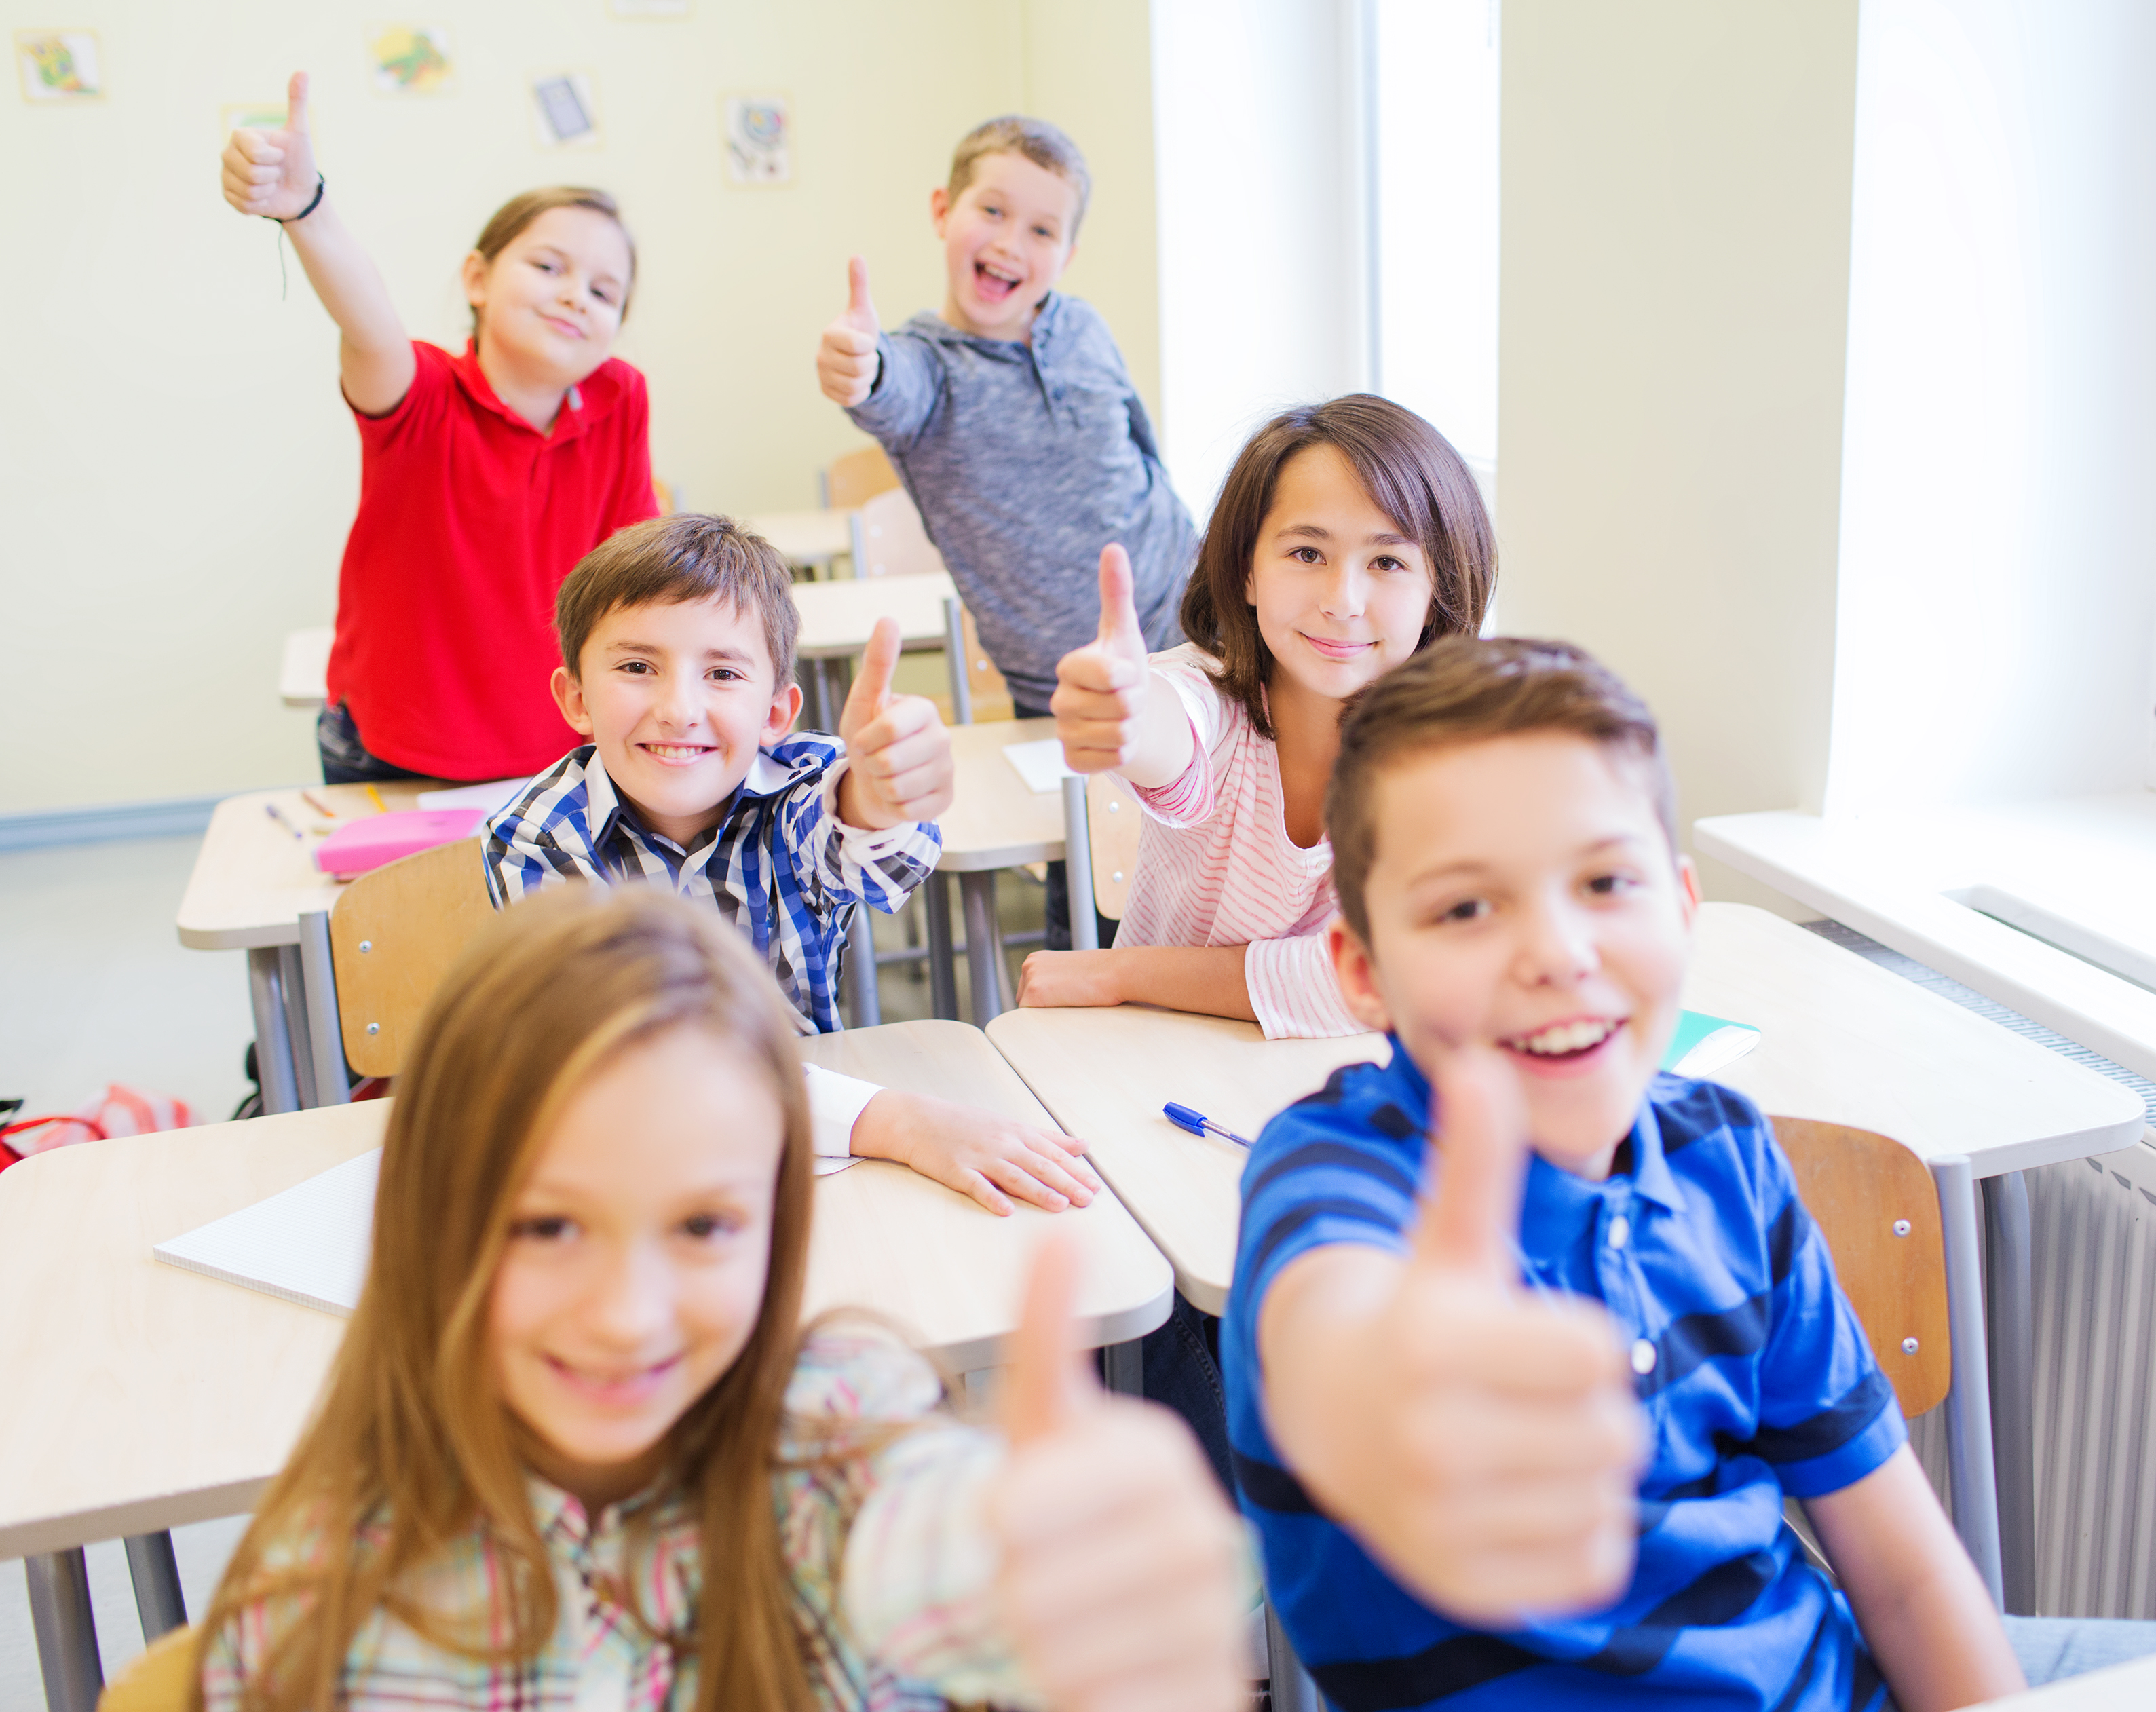 education-elementary-school-learning-gesture-people-concept-group-school-kids-sitting-classroom-showing-thumbs-up